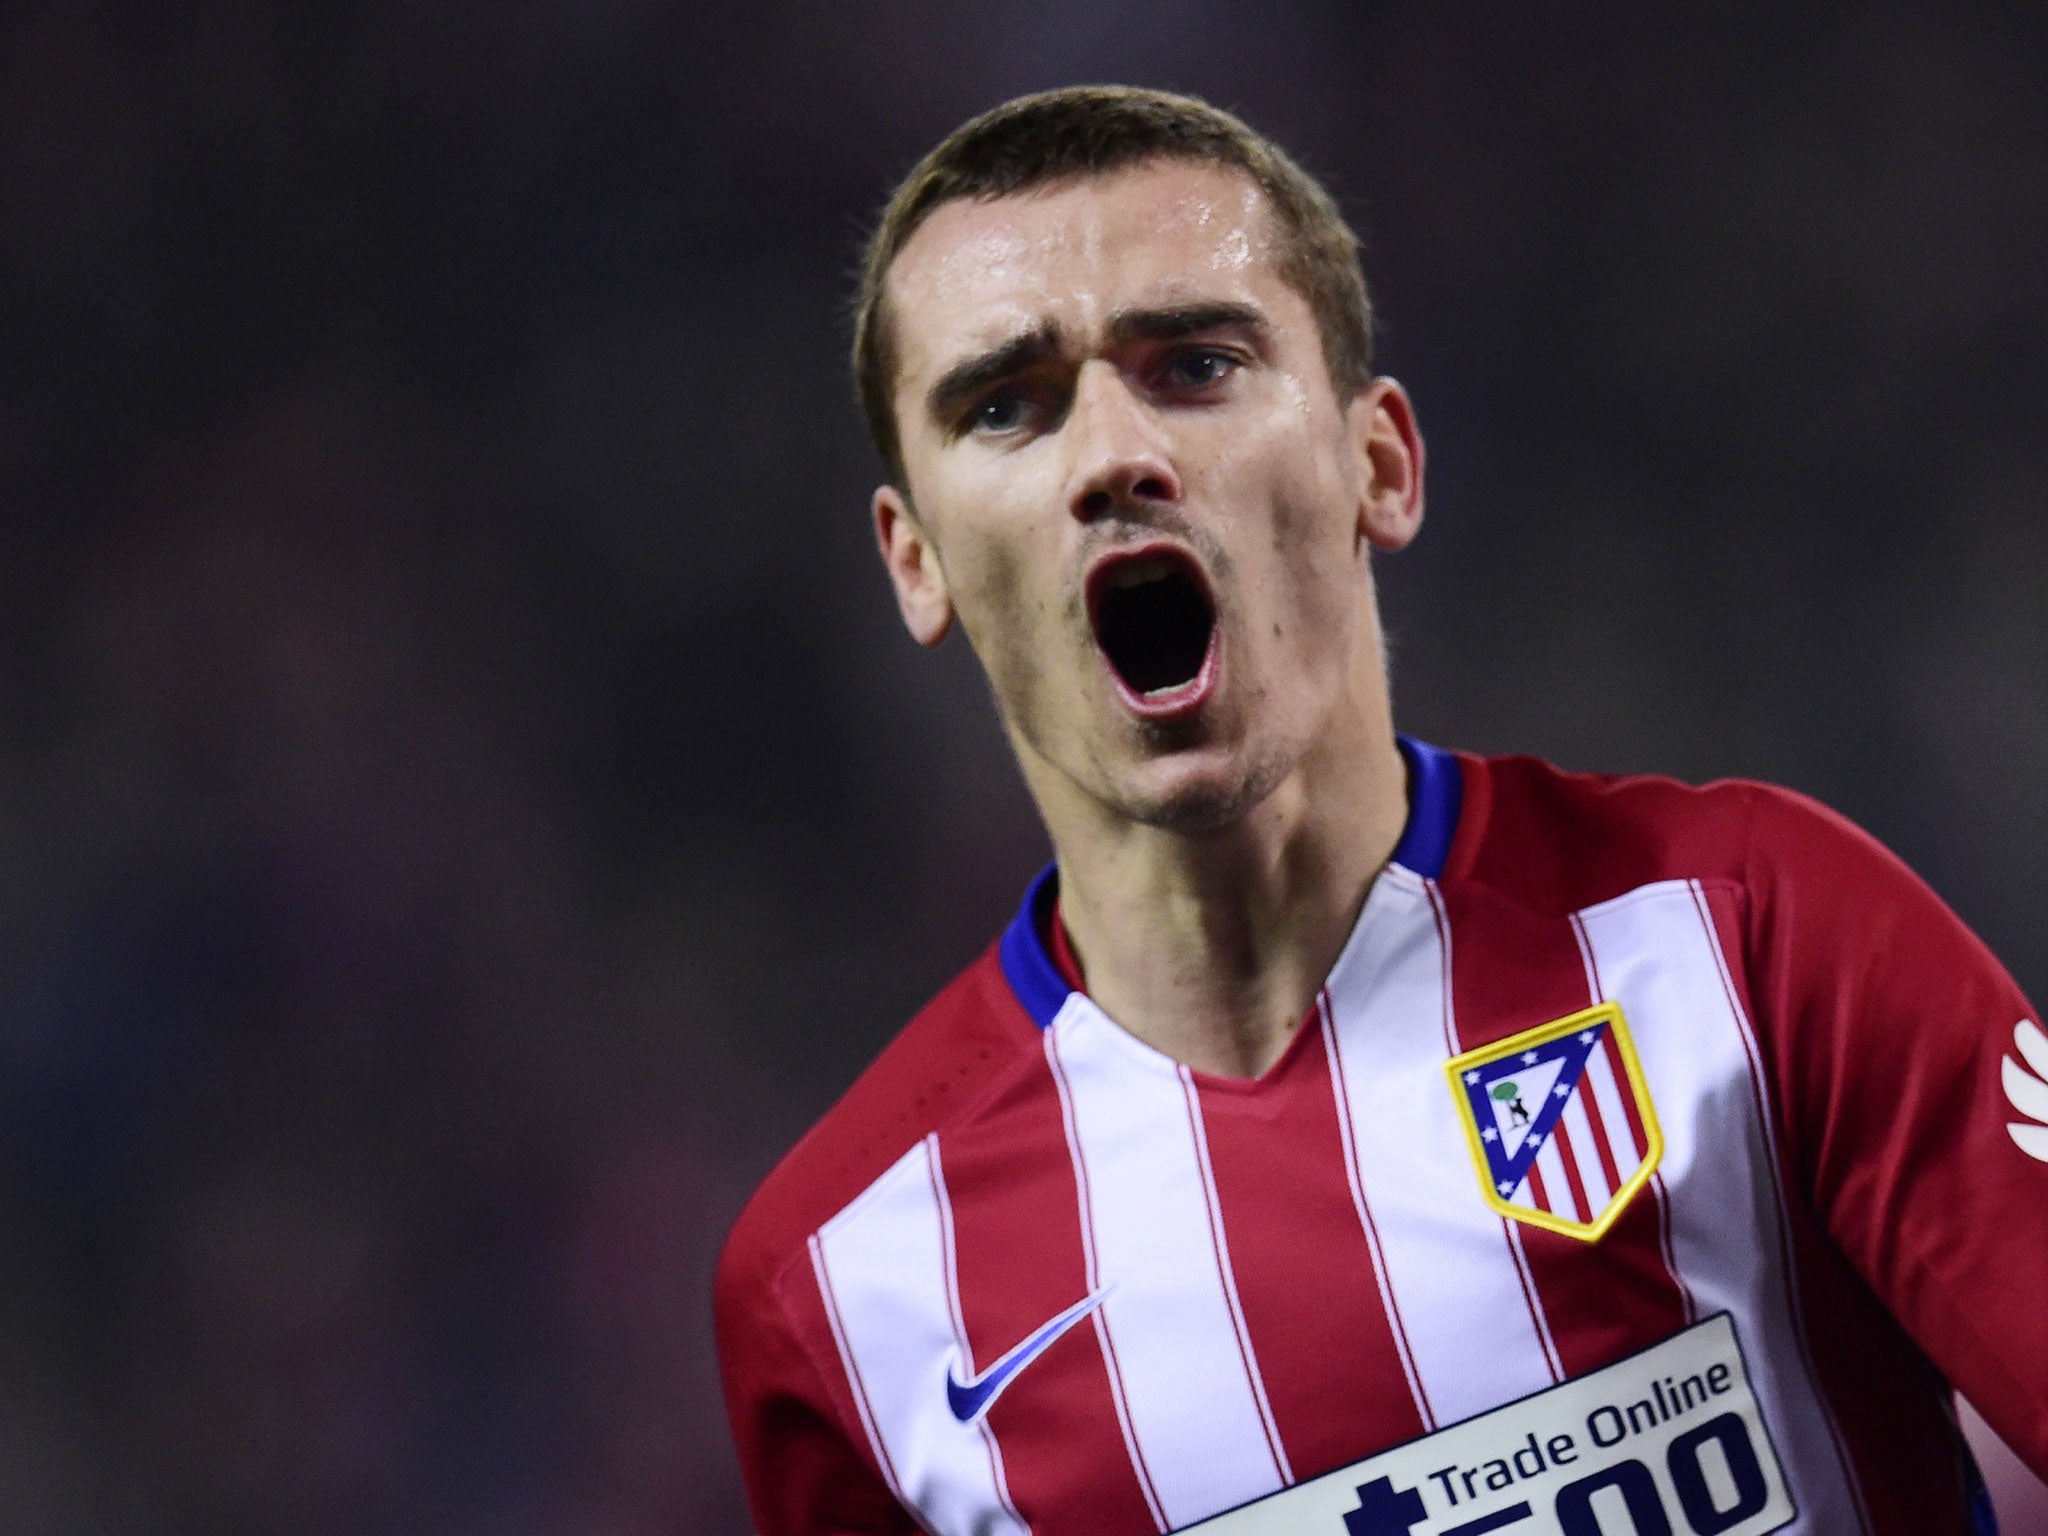 Atletico Madrid forward Anotine Griezmann could be targeted by Manchester United in the summer